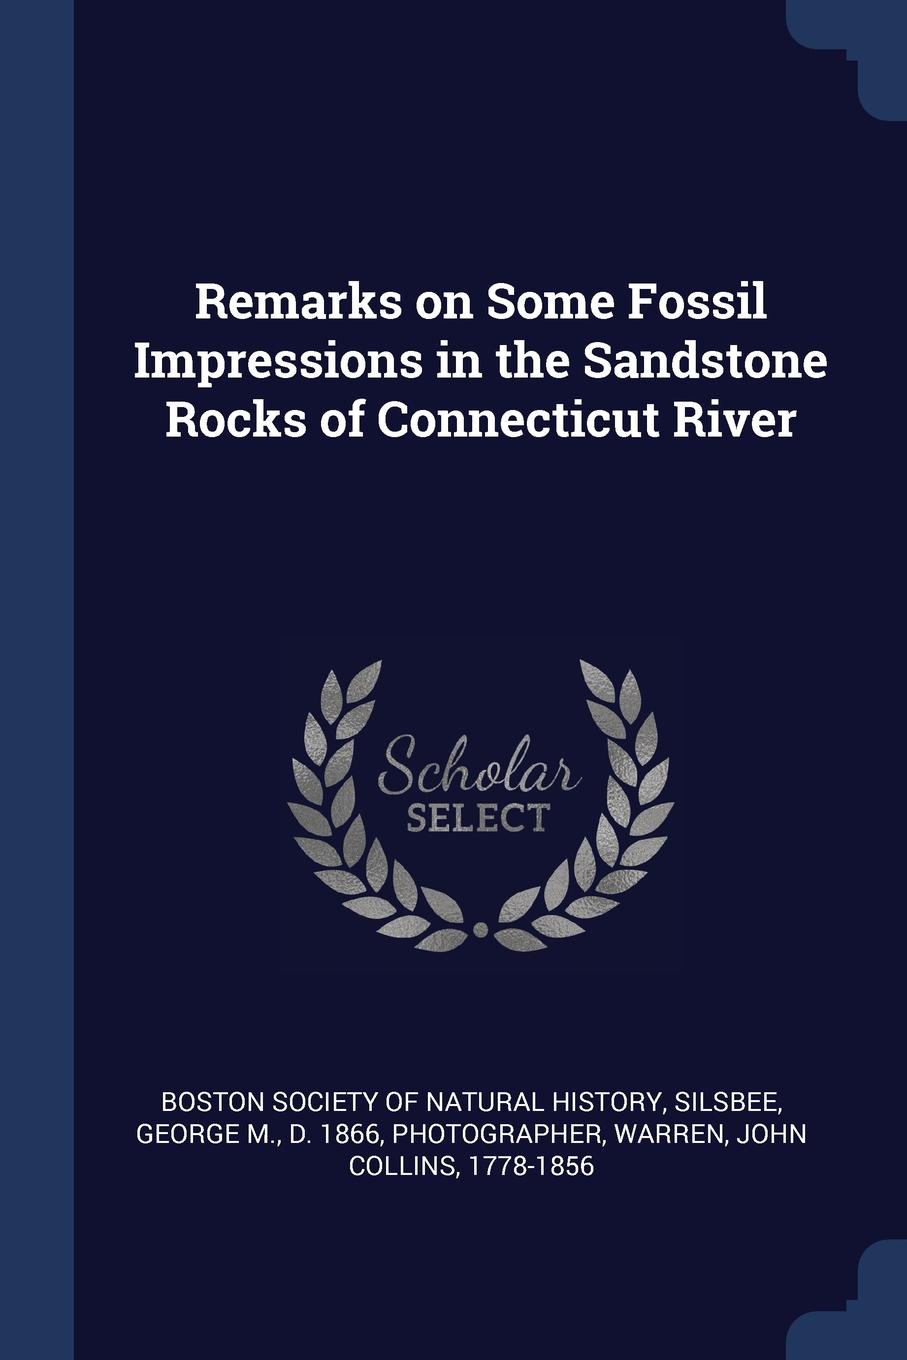 Remarks on Some Fossil Impressions in the Sandstone Rocks of Connecticut River